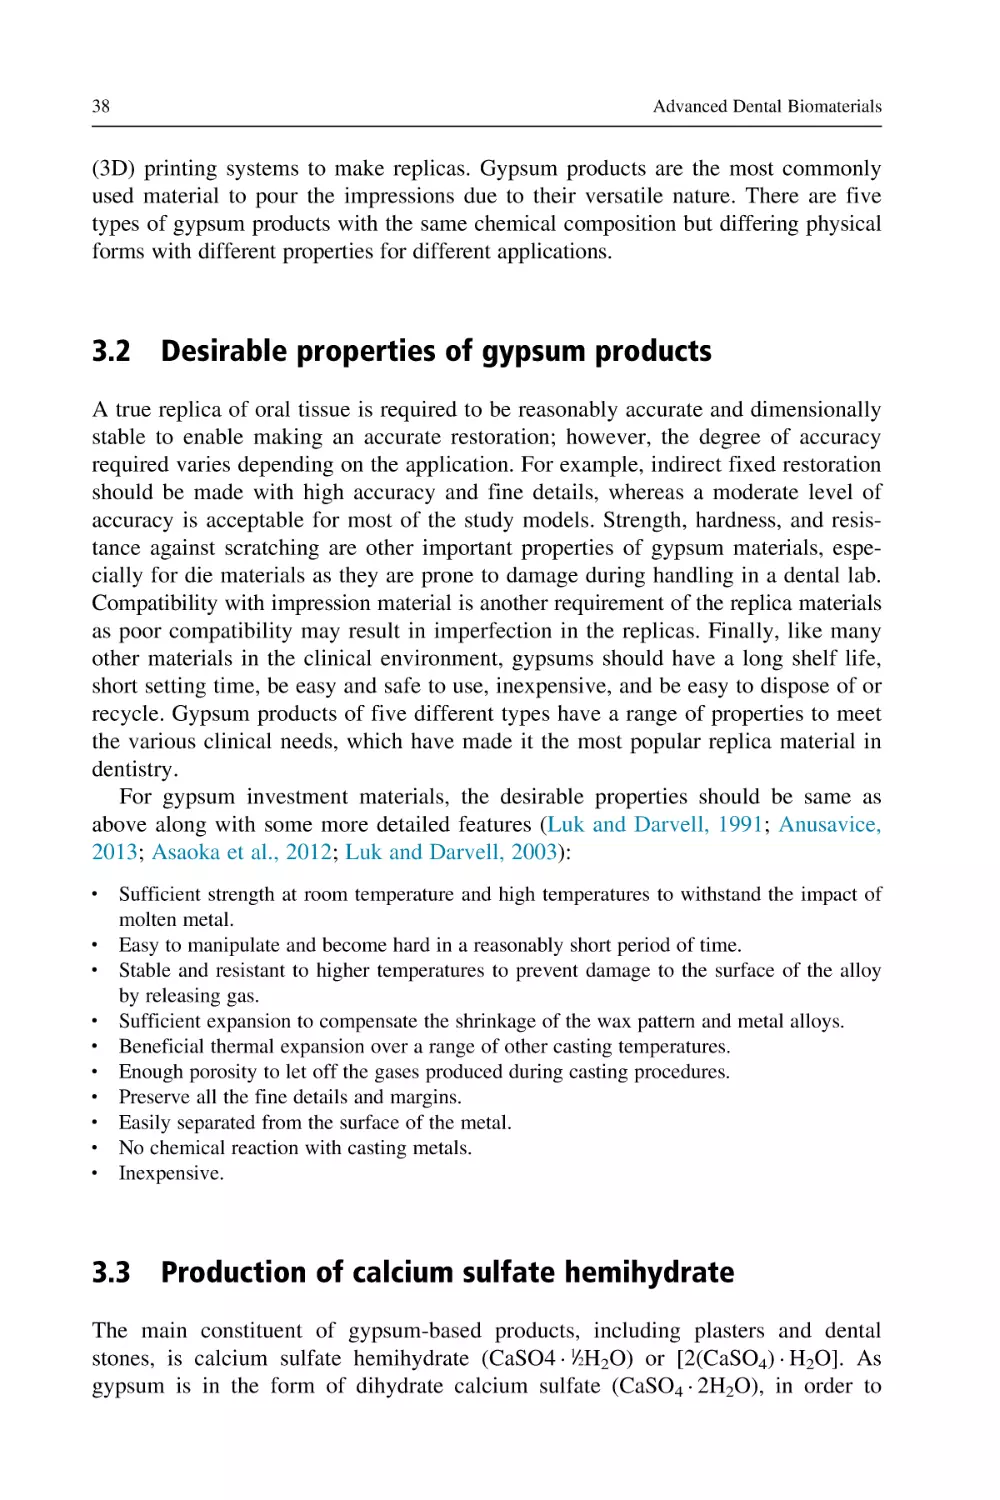 3.2 Desirable properties of gypsum products
3.3 Production of calcium sulfate hemihydrate